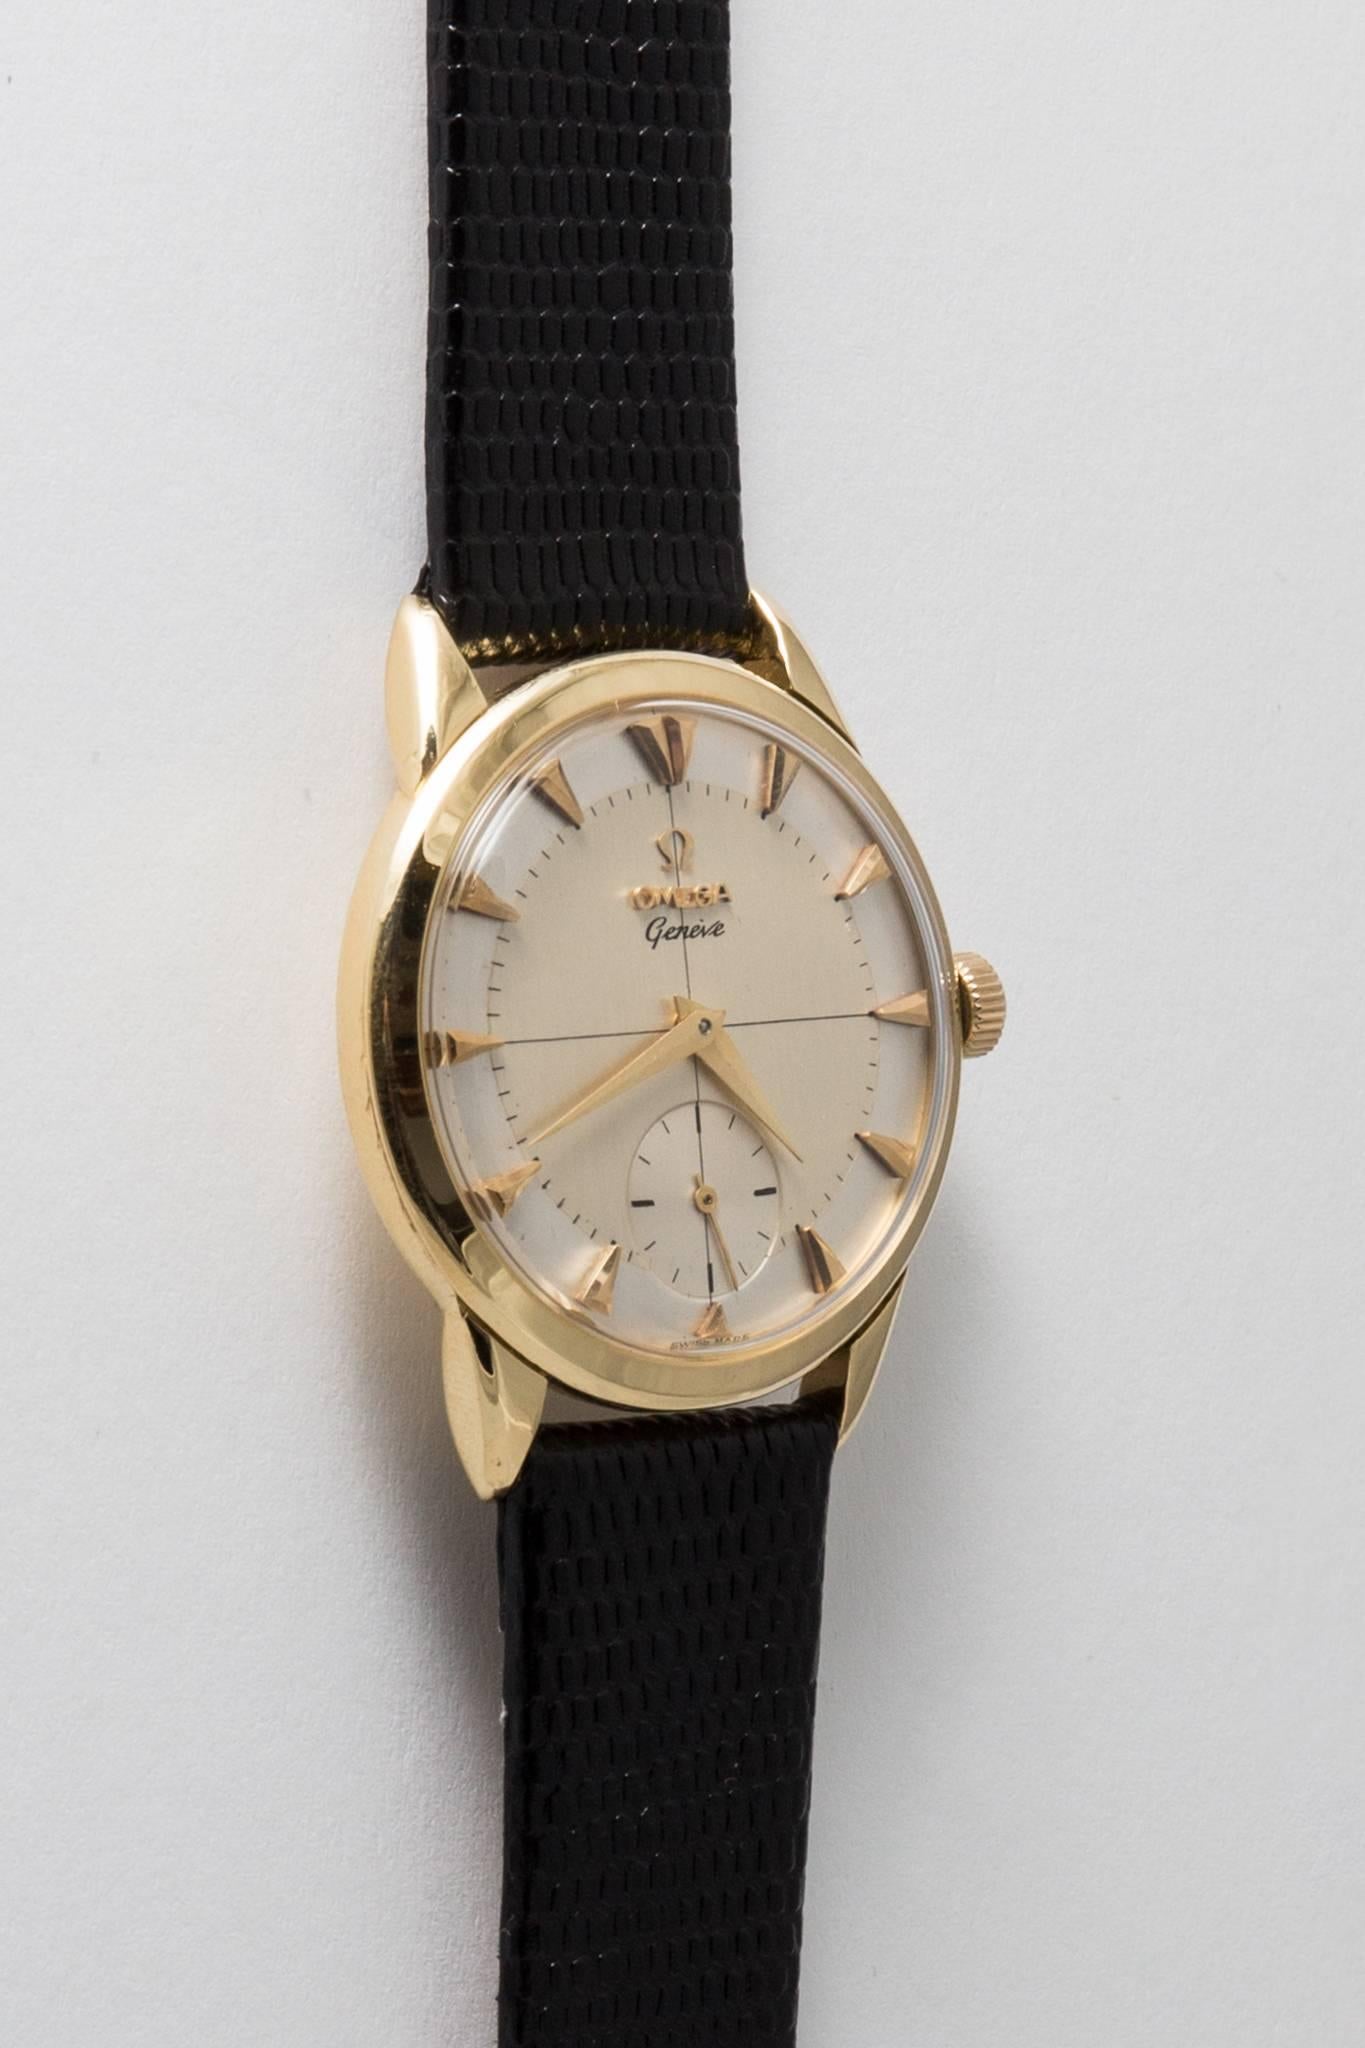 A vintage mens Omega wrist watch in solid 18 karat yellow gold. Coming from their higher end line, the Geneve collection this watch features a heavy 18 karat gold case and a silvered dial with yellow gold dagger shaped hour markers.

In excellent